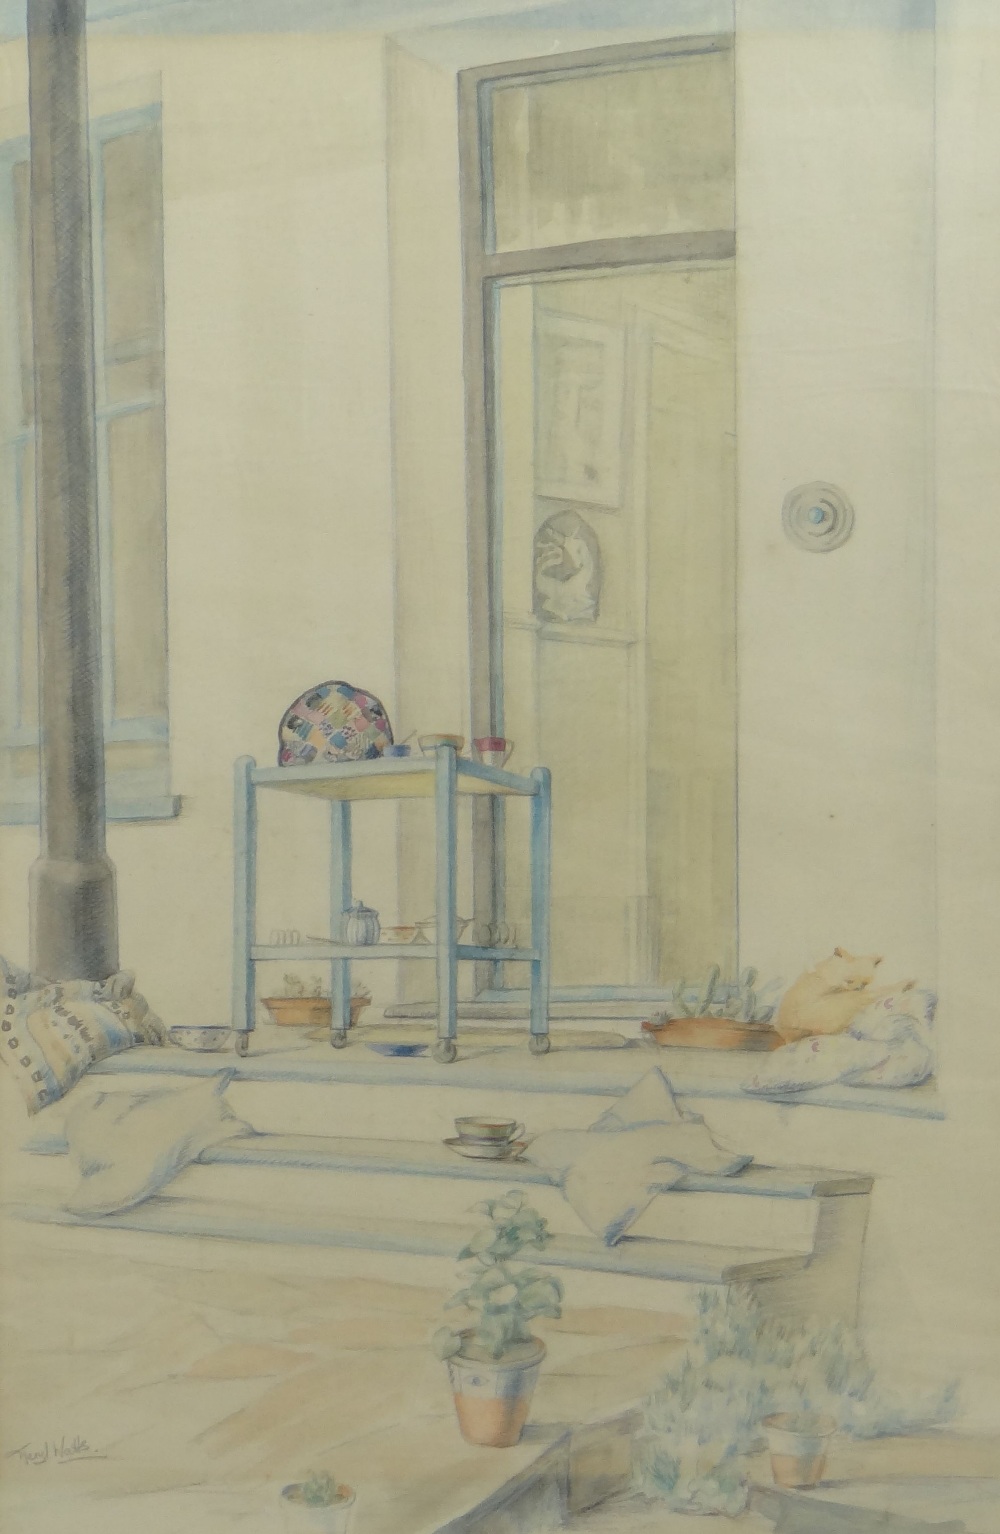 MERYL WATTS watercolour and pencil - household items and cats on the steps to the artist's home in